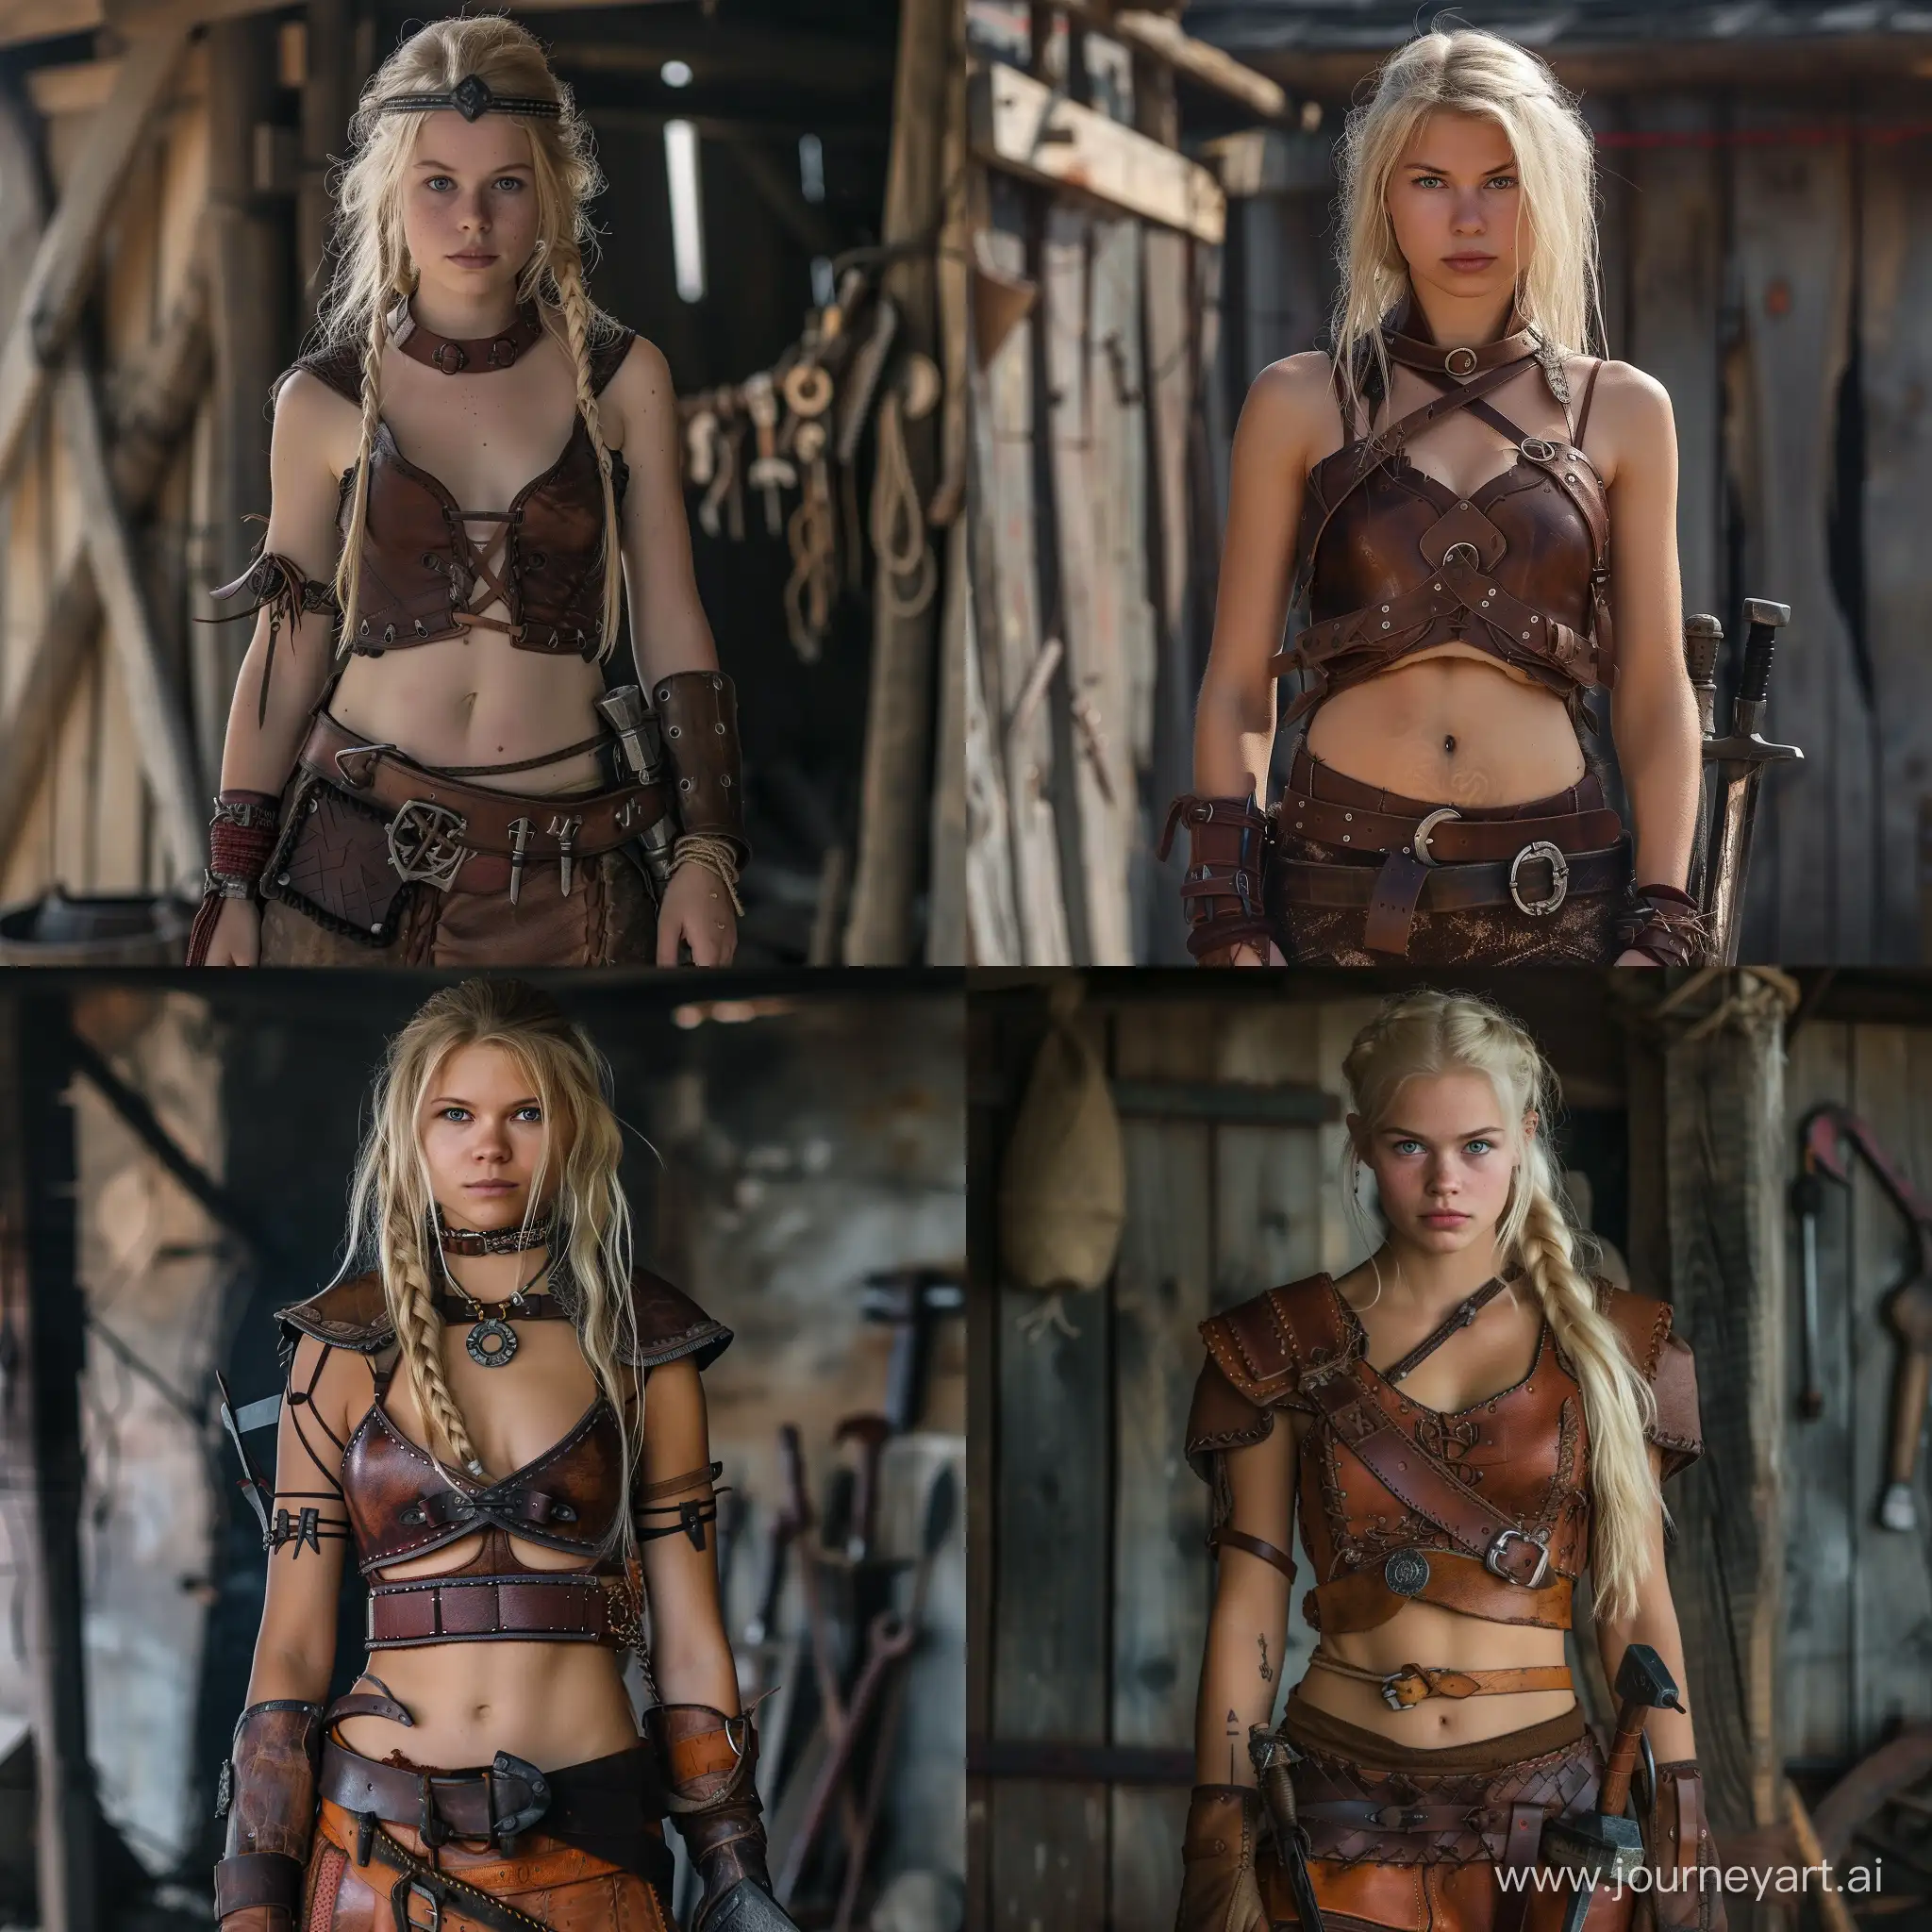 Young looking Blond girl, thin, small breasts, Leather armor, smithing tools on hip, 1.50 meters tall, cut in half